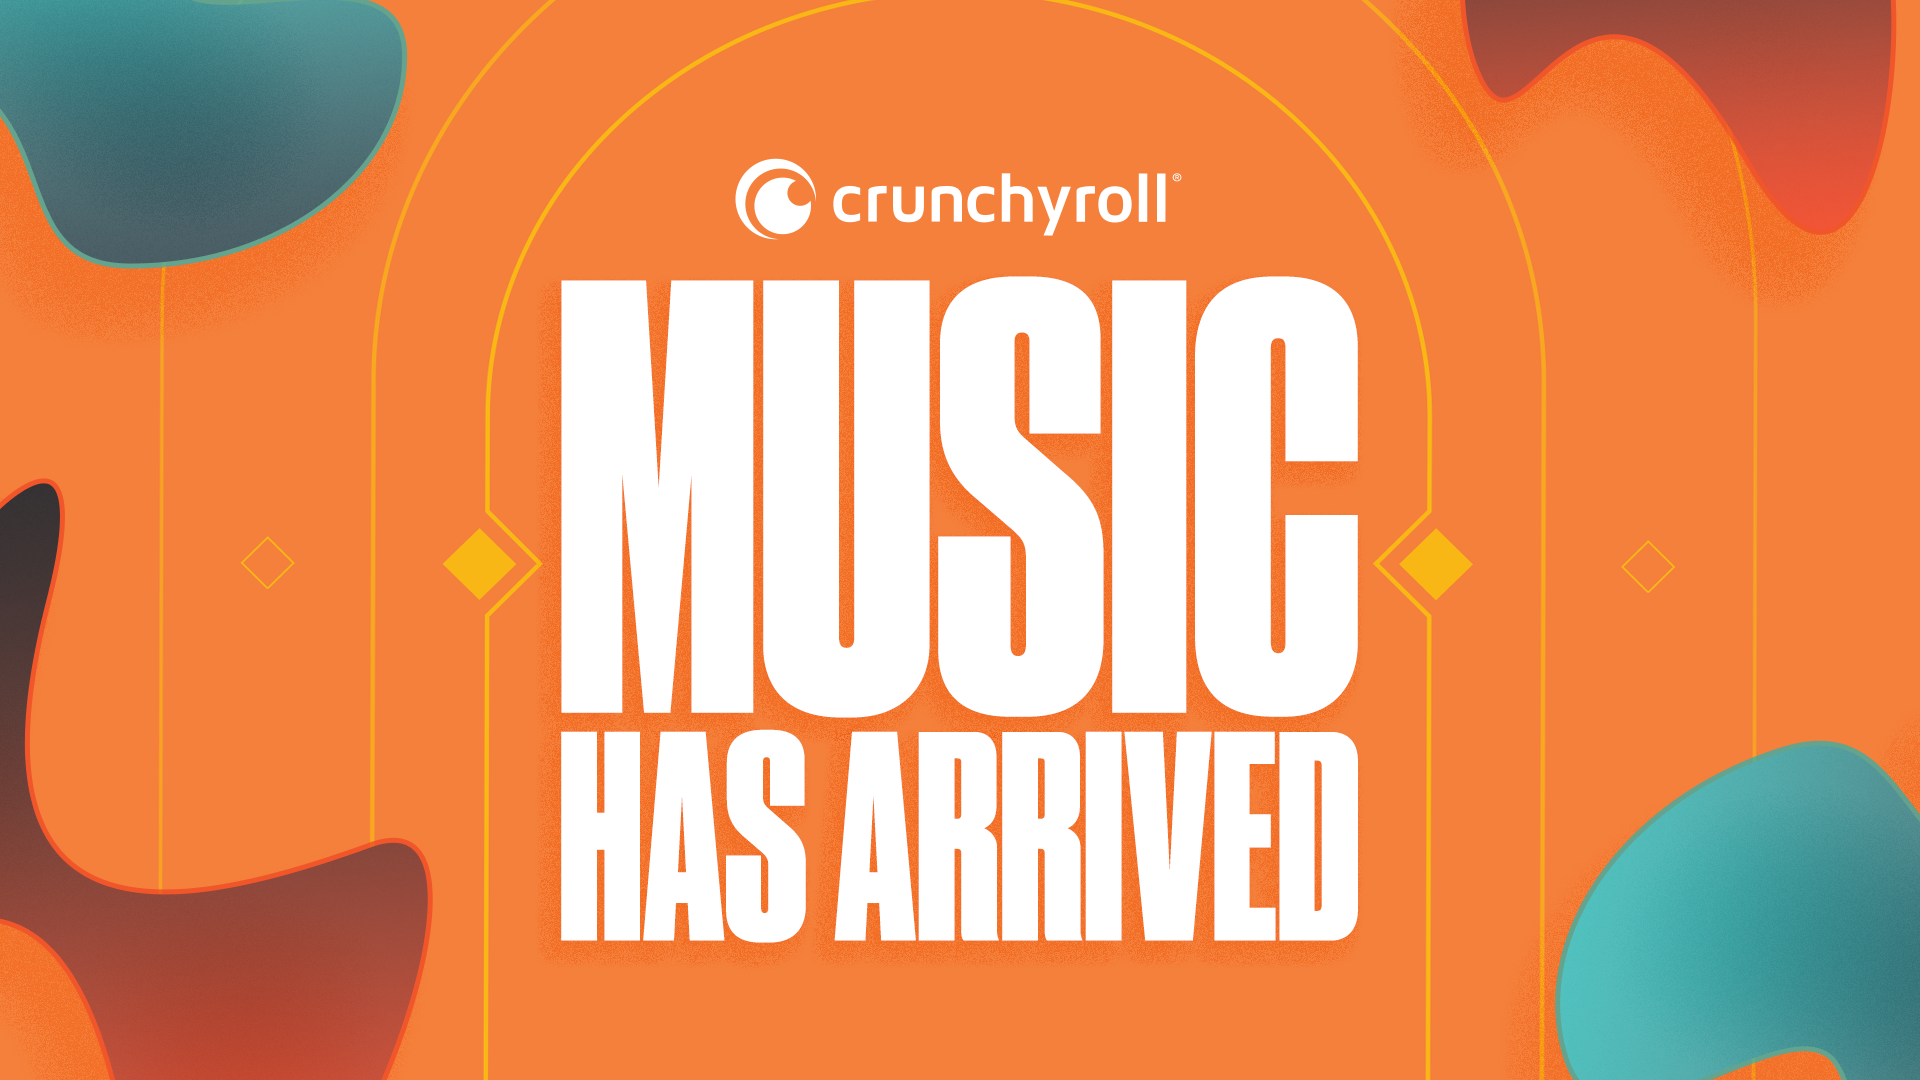 #Music Videos & Concerts for LiSA, Aimer, FLOW and More Arrive on Crunchyroll